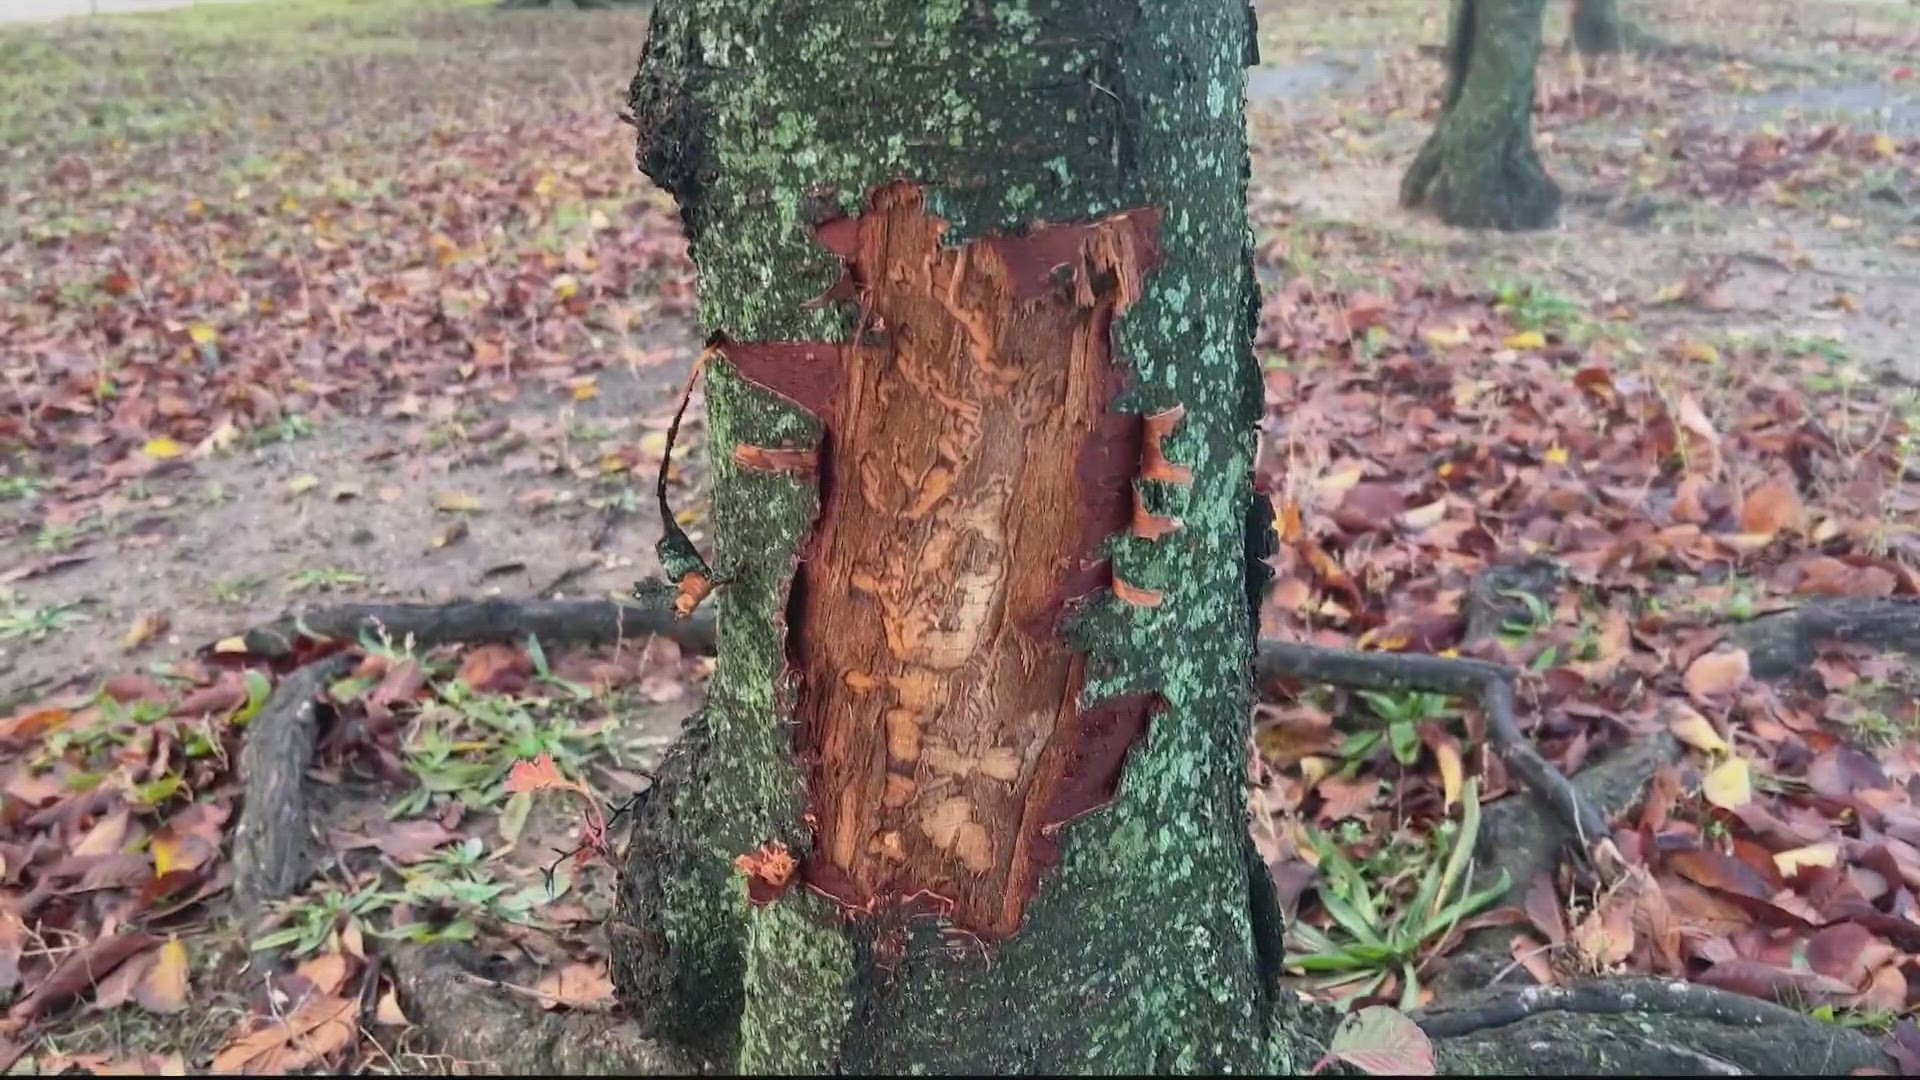 Here's what the National Park Service is doing to keep the trees a little less appetizing